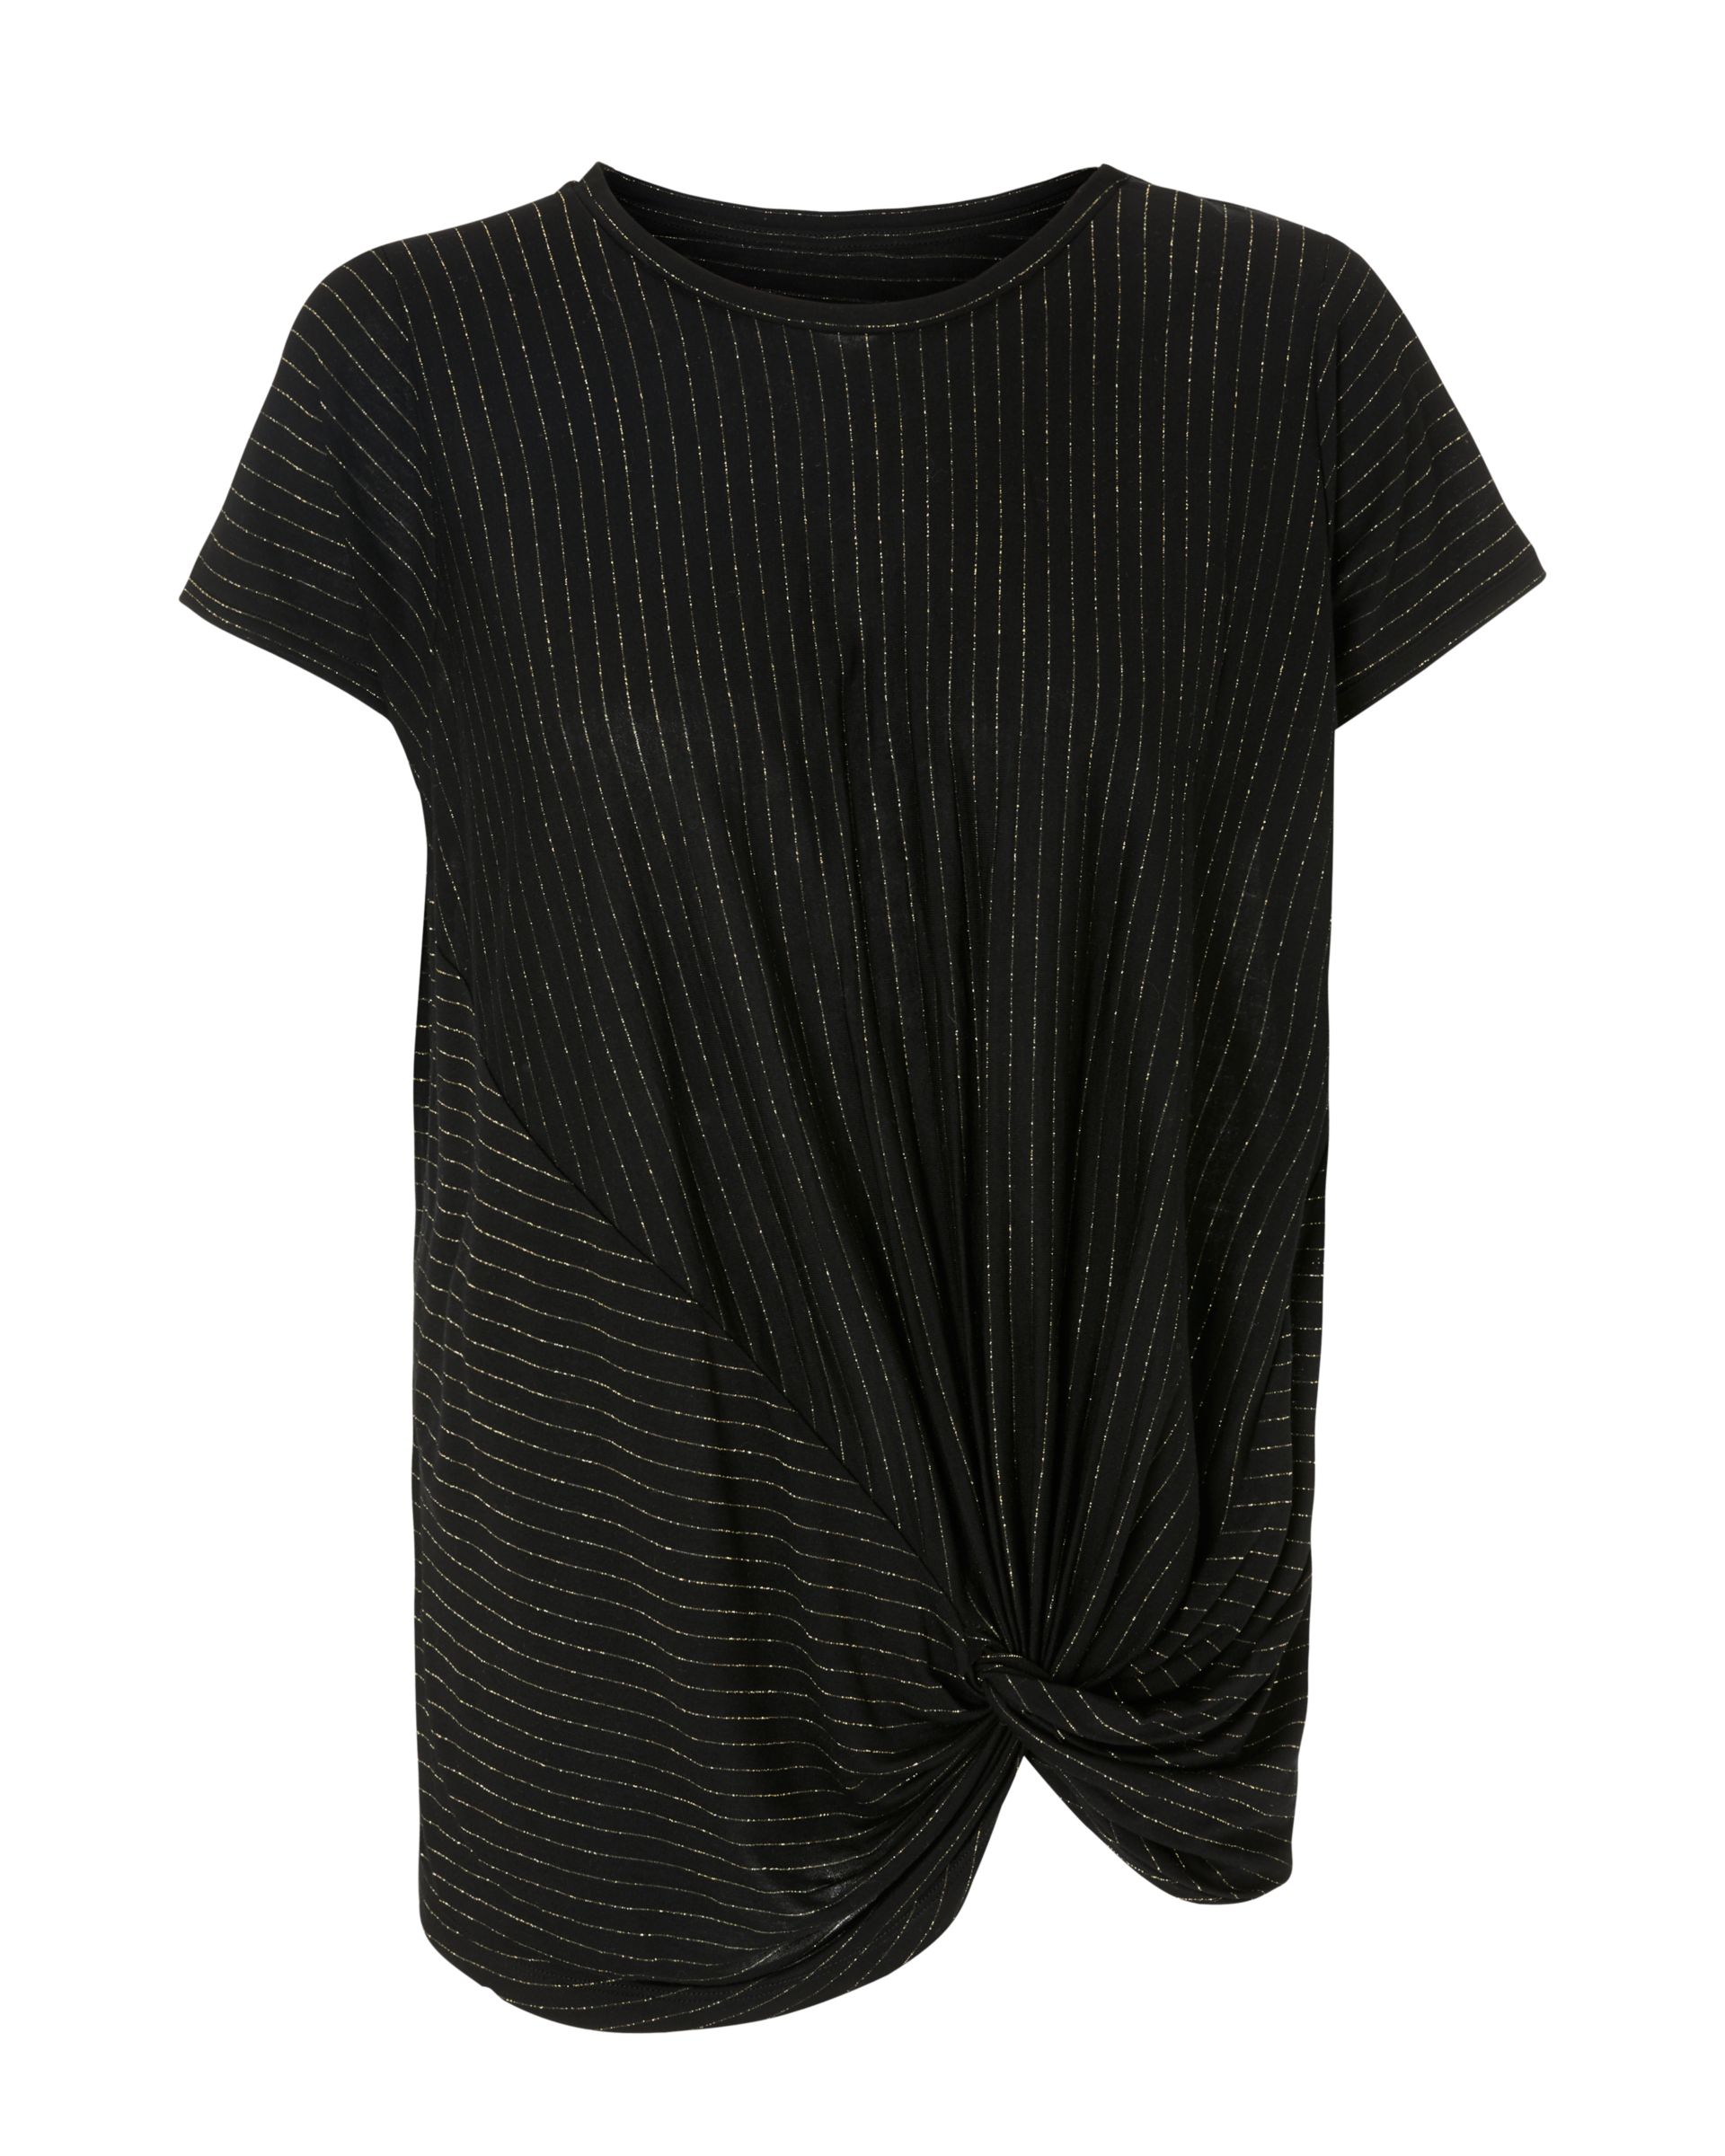 AND/OR Metallic Sparkle Stripe Knot Top, Black/Gold